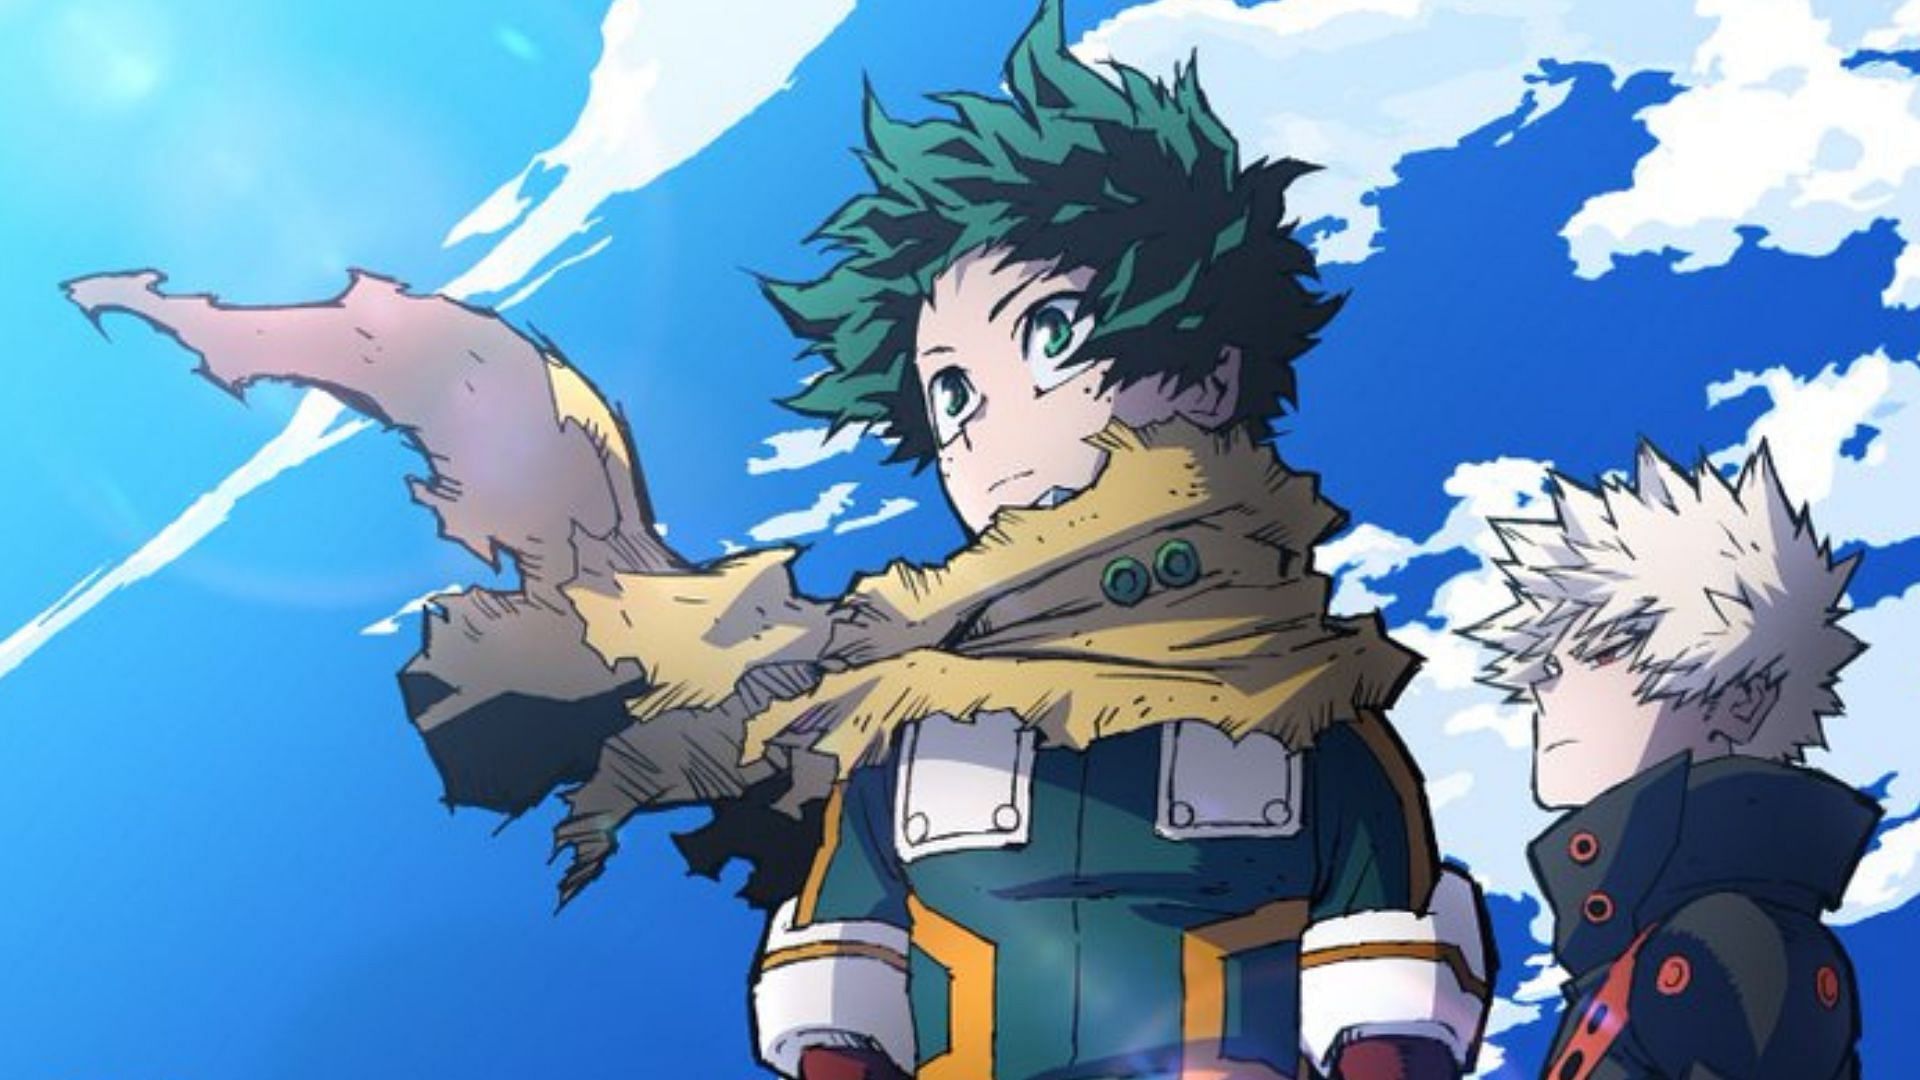 My Hero Academia season 7 release date speculation and latest news